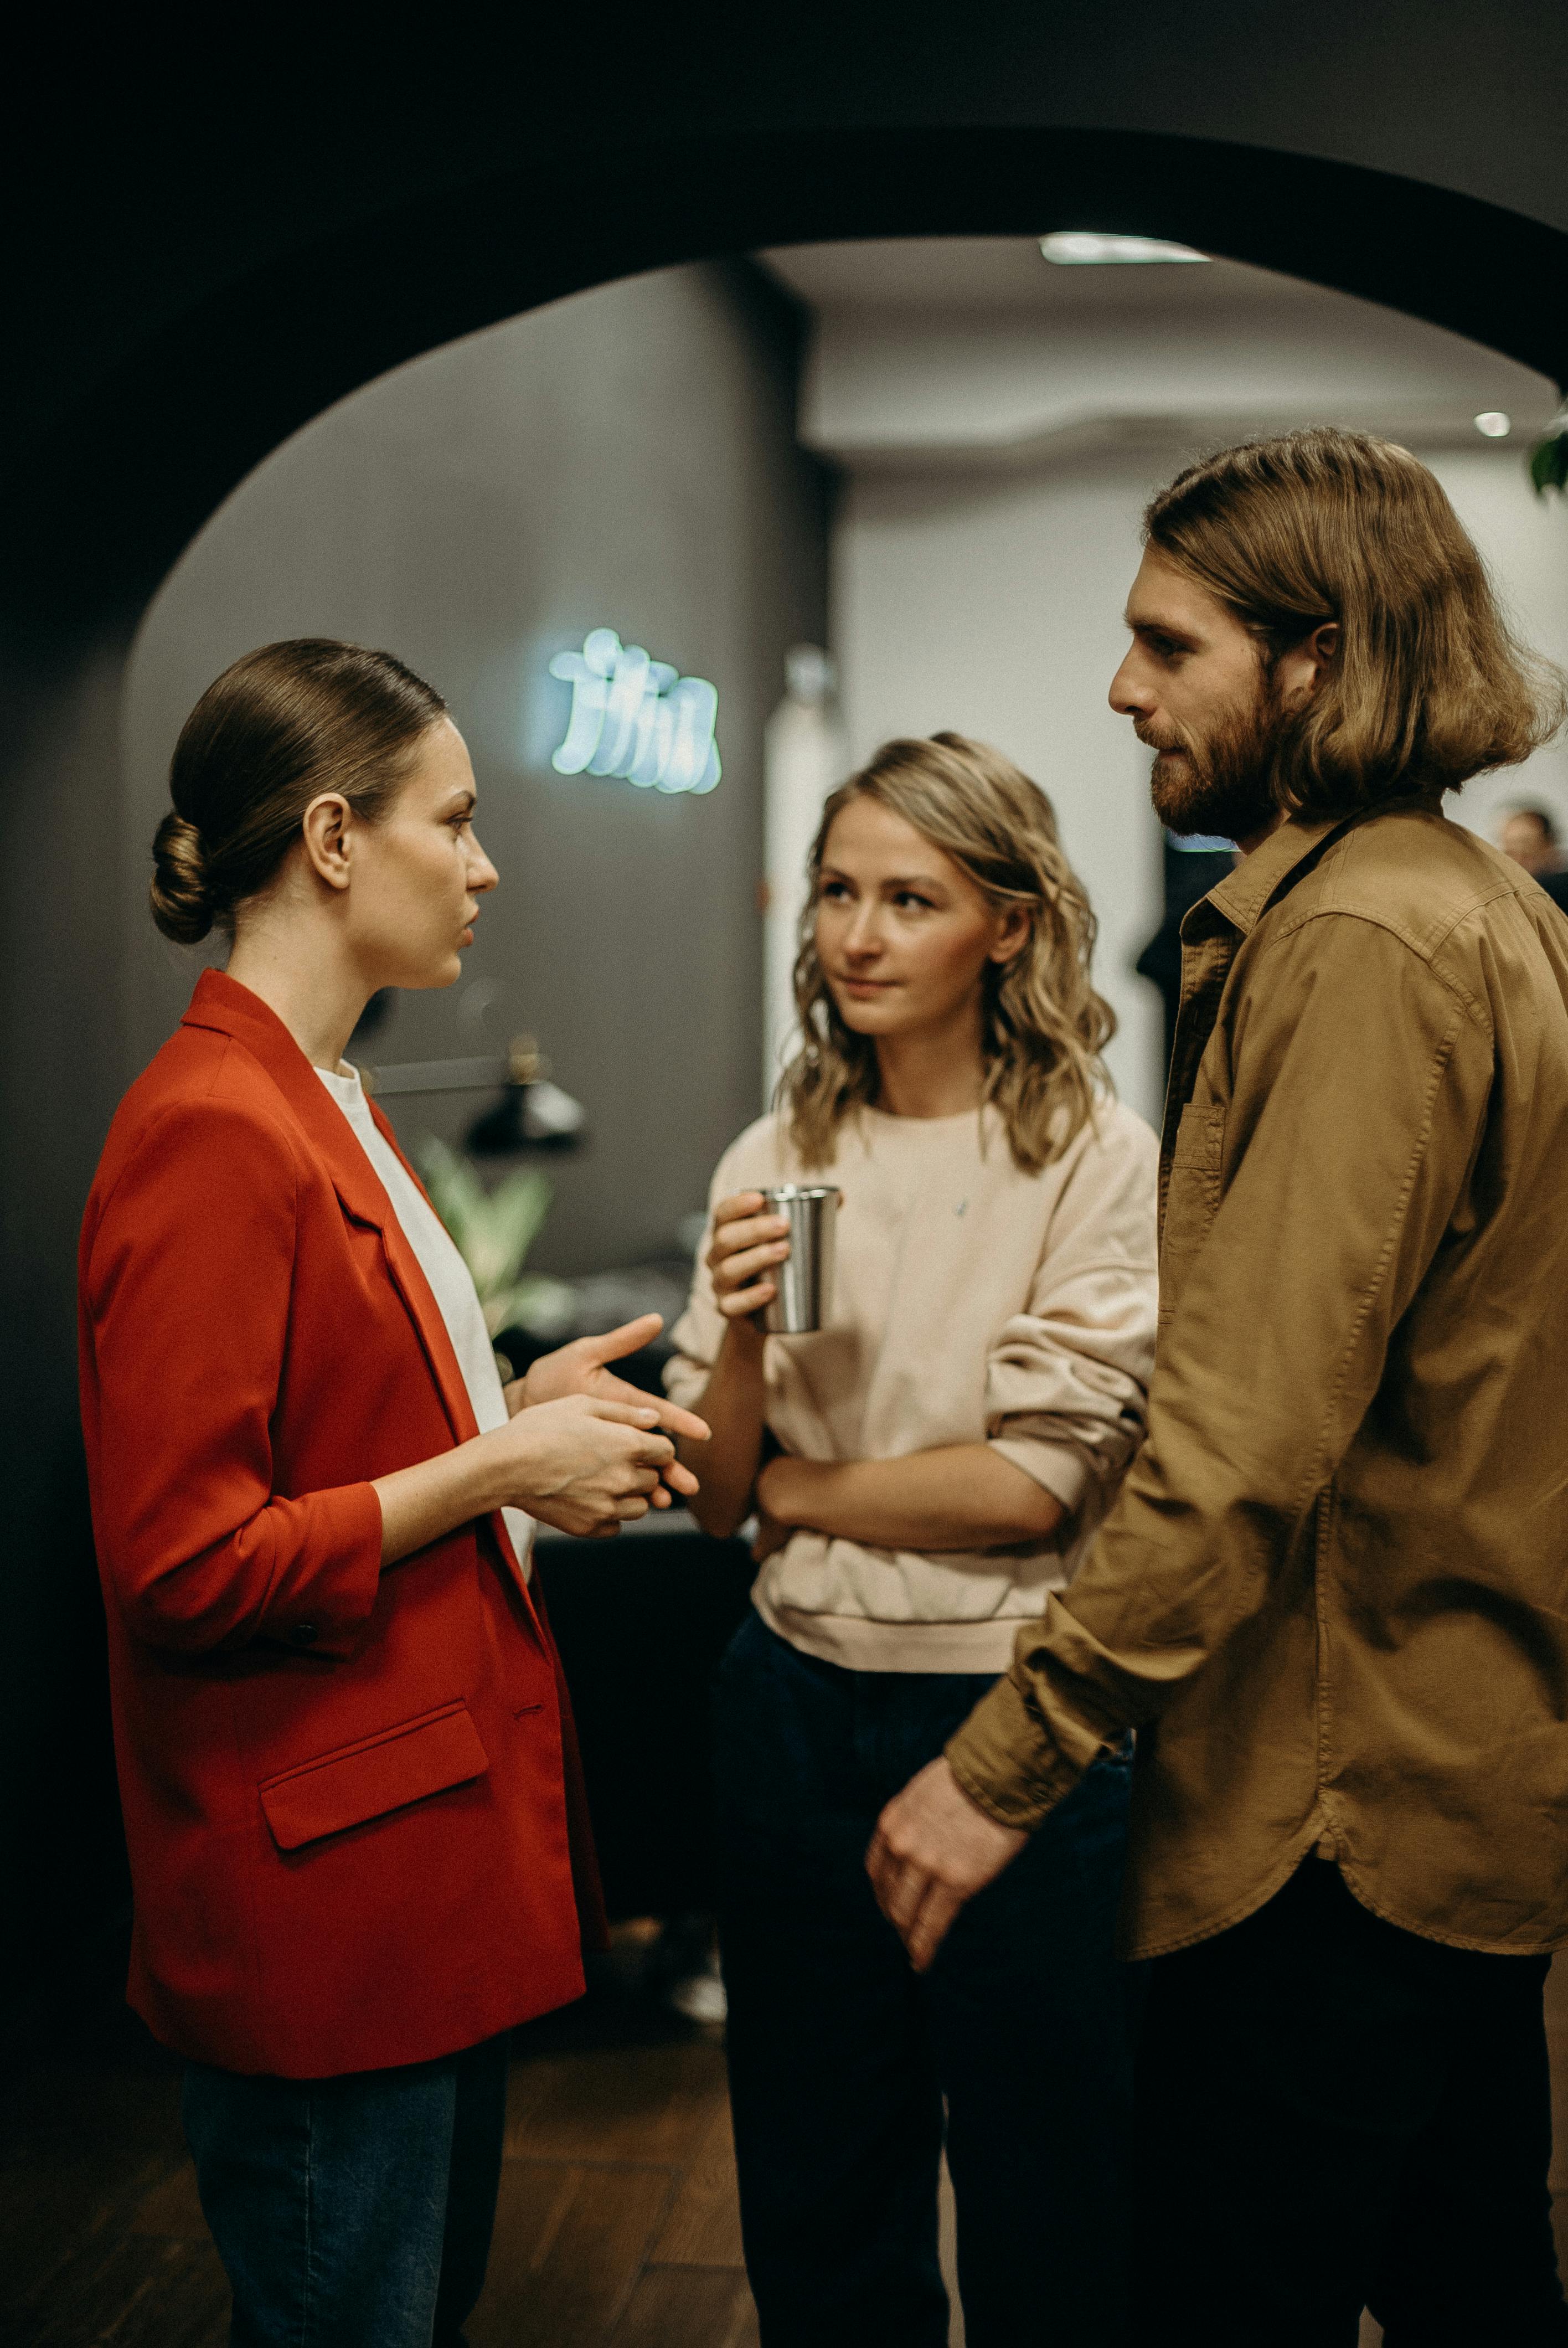 Two women and a man having a conversation | Source: Pexels